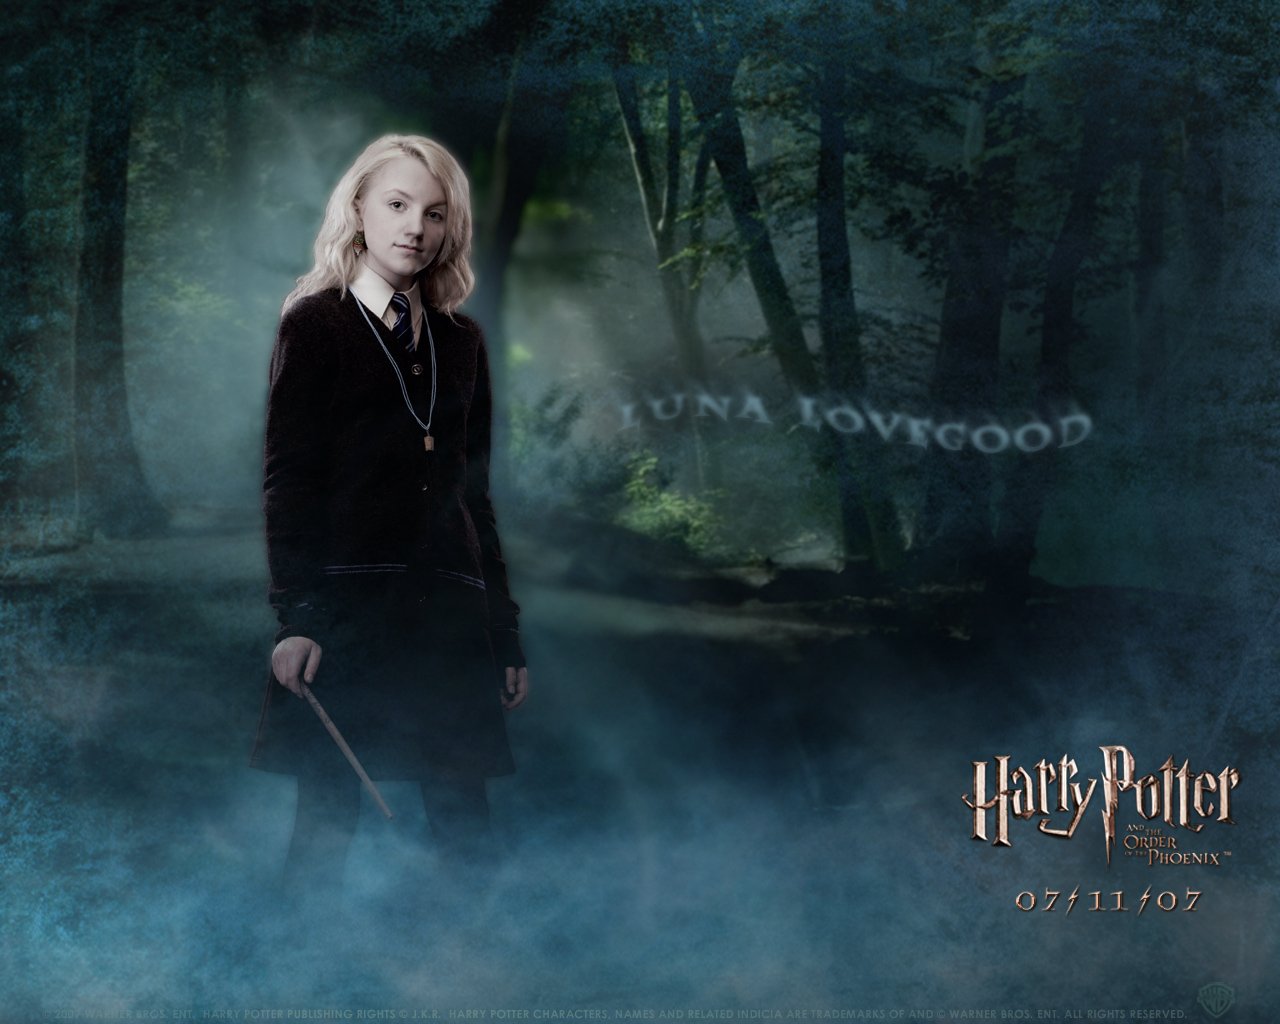 luna lovegood, movie, harry potter and the order of the phoenix for Windows